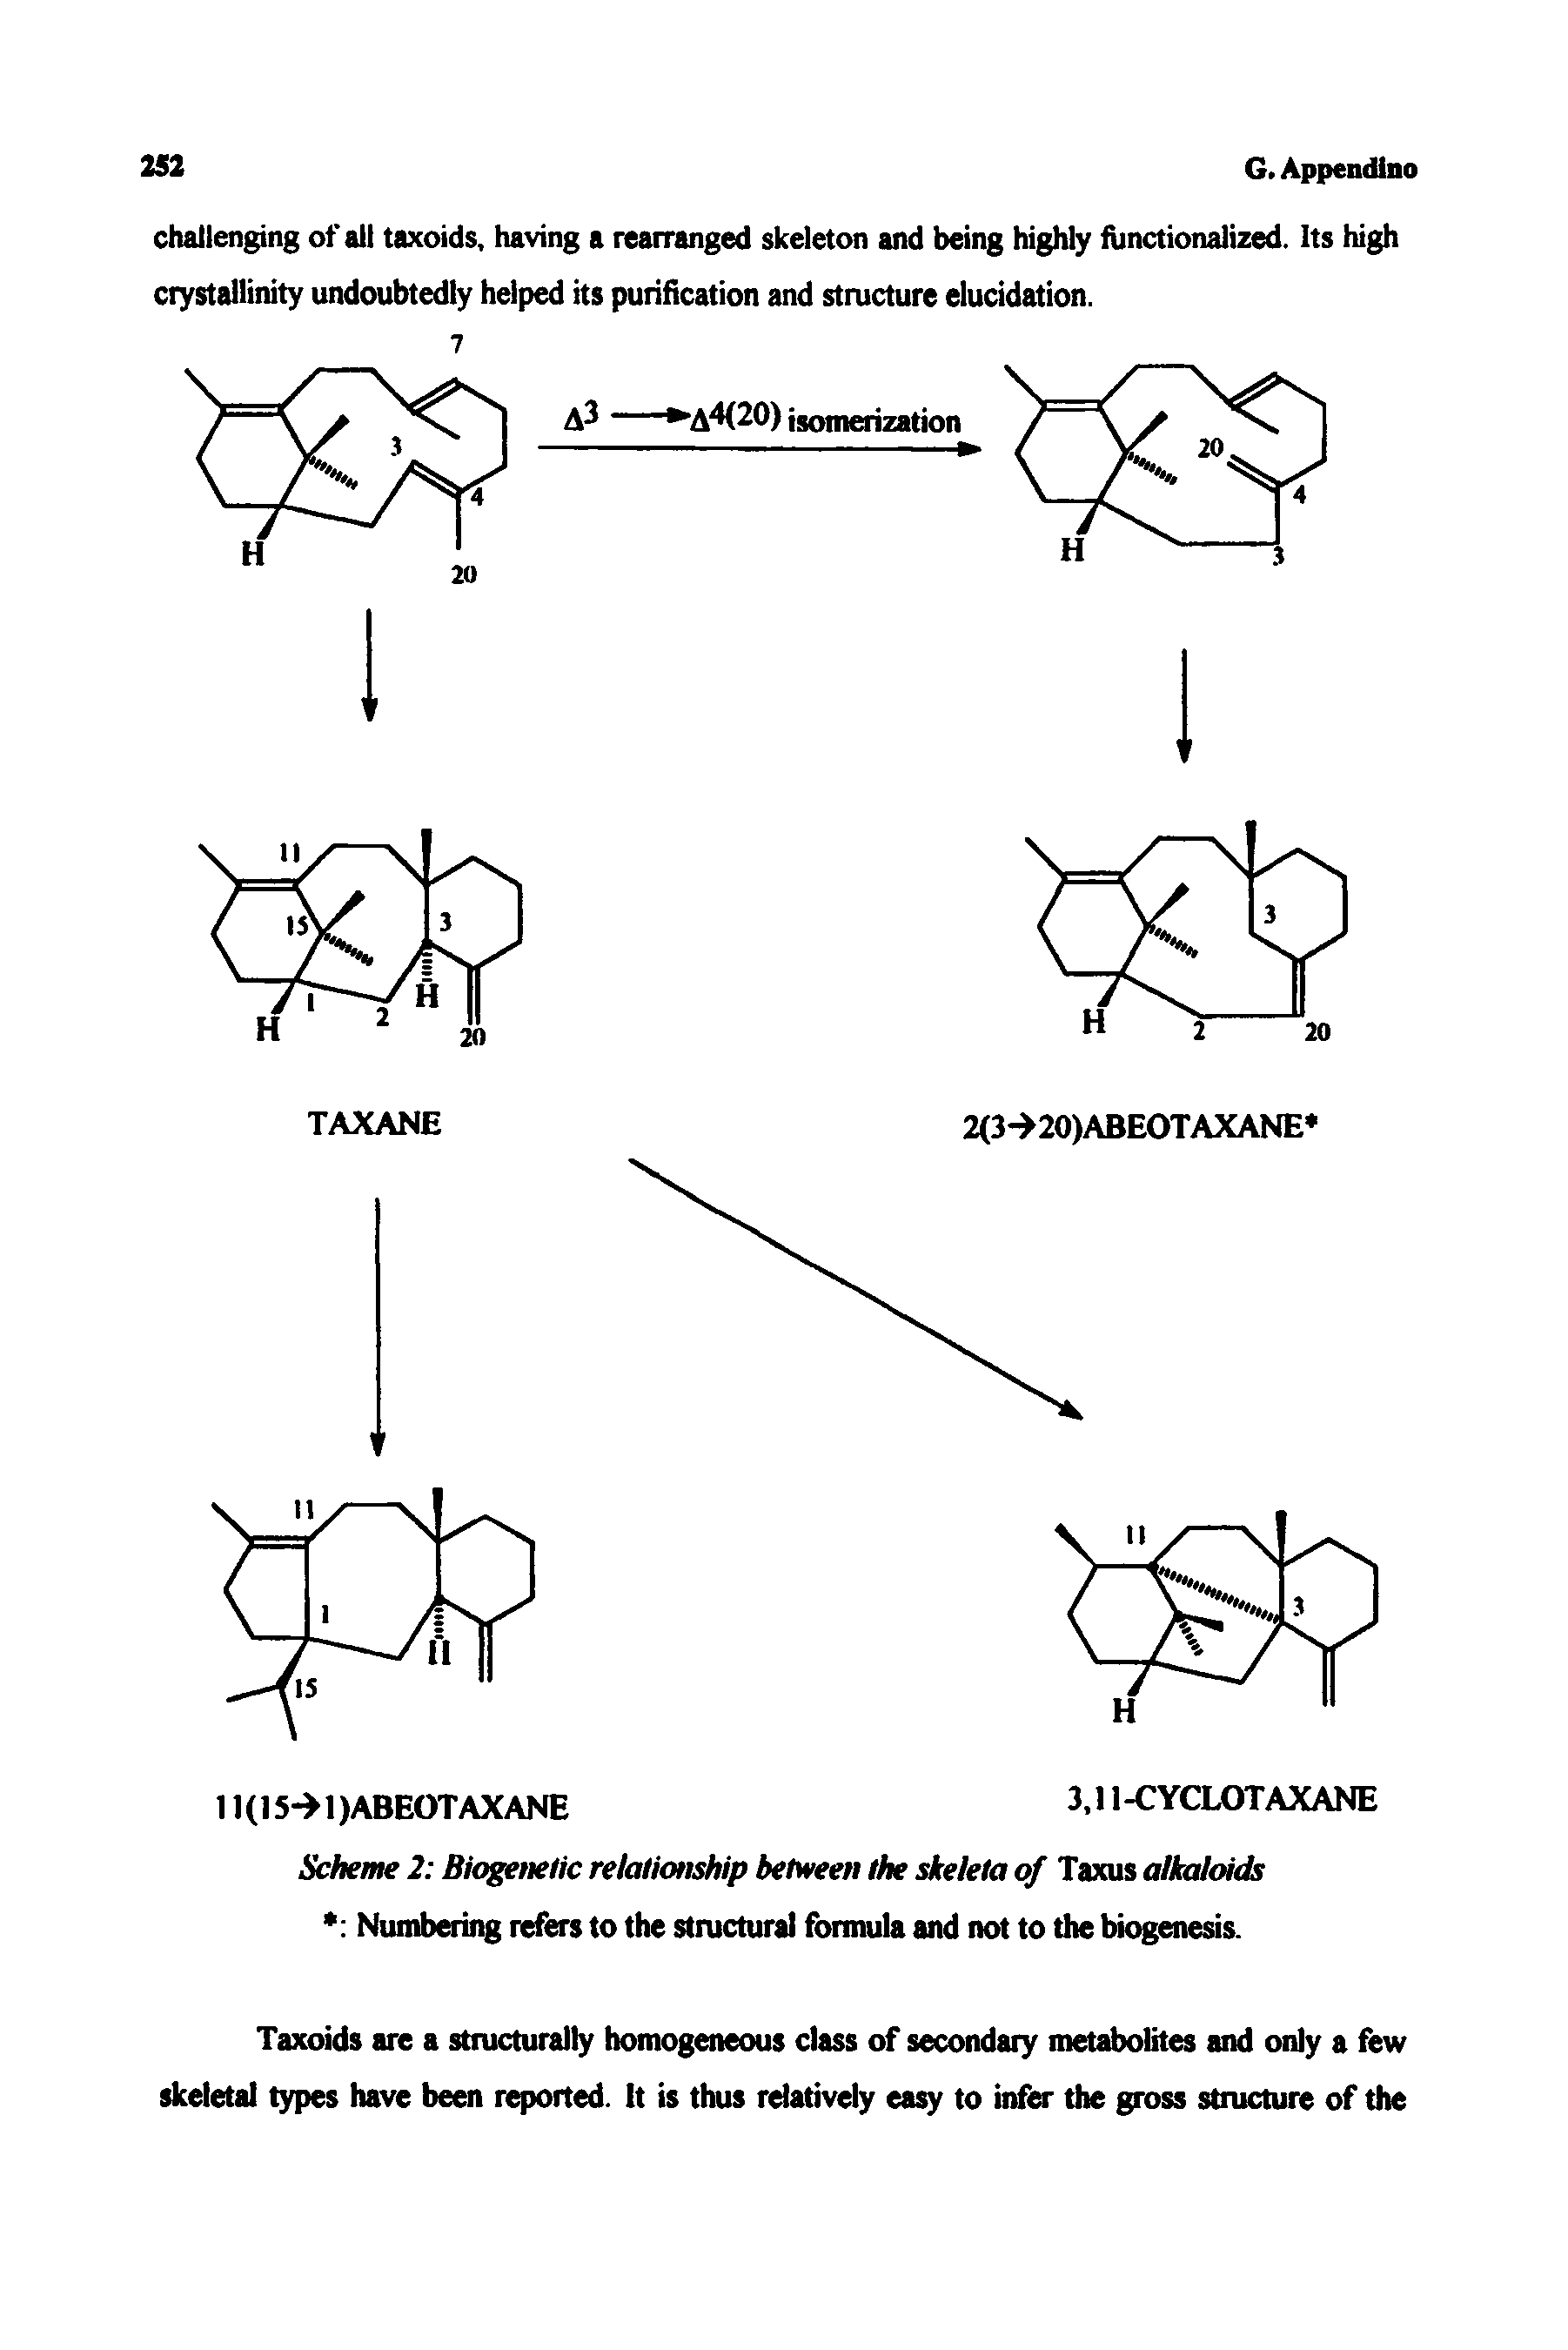 Scheme 2 Biogenetic relationship between the skeleta of Taxus alkaloids Numbering refers to the structural formula and not to the biogenesis.